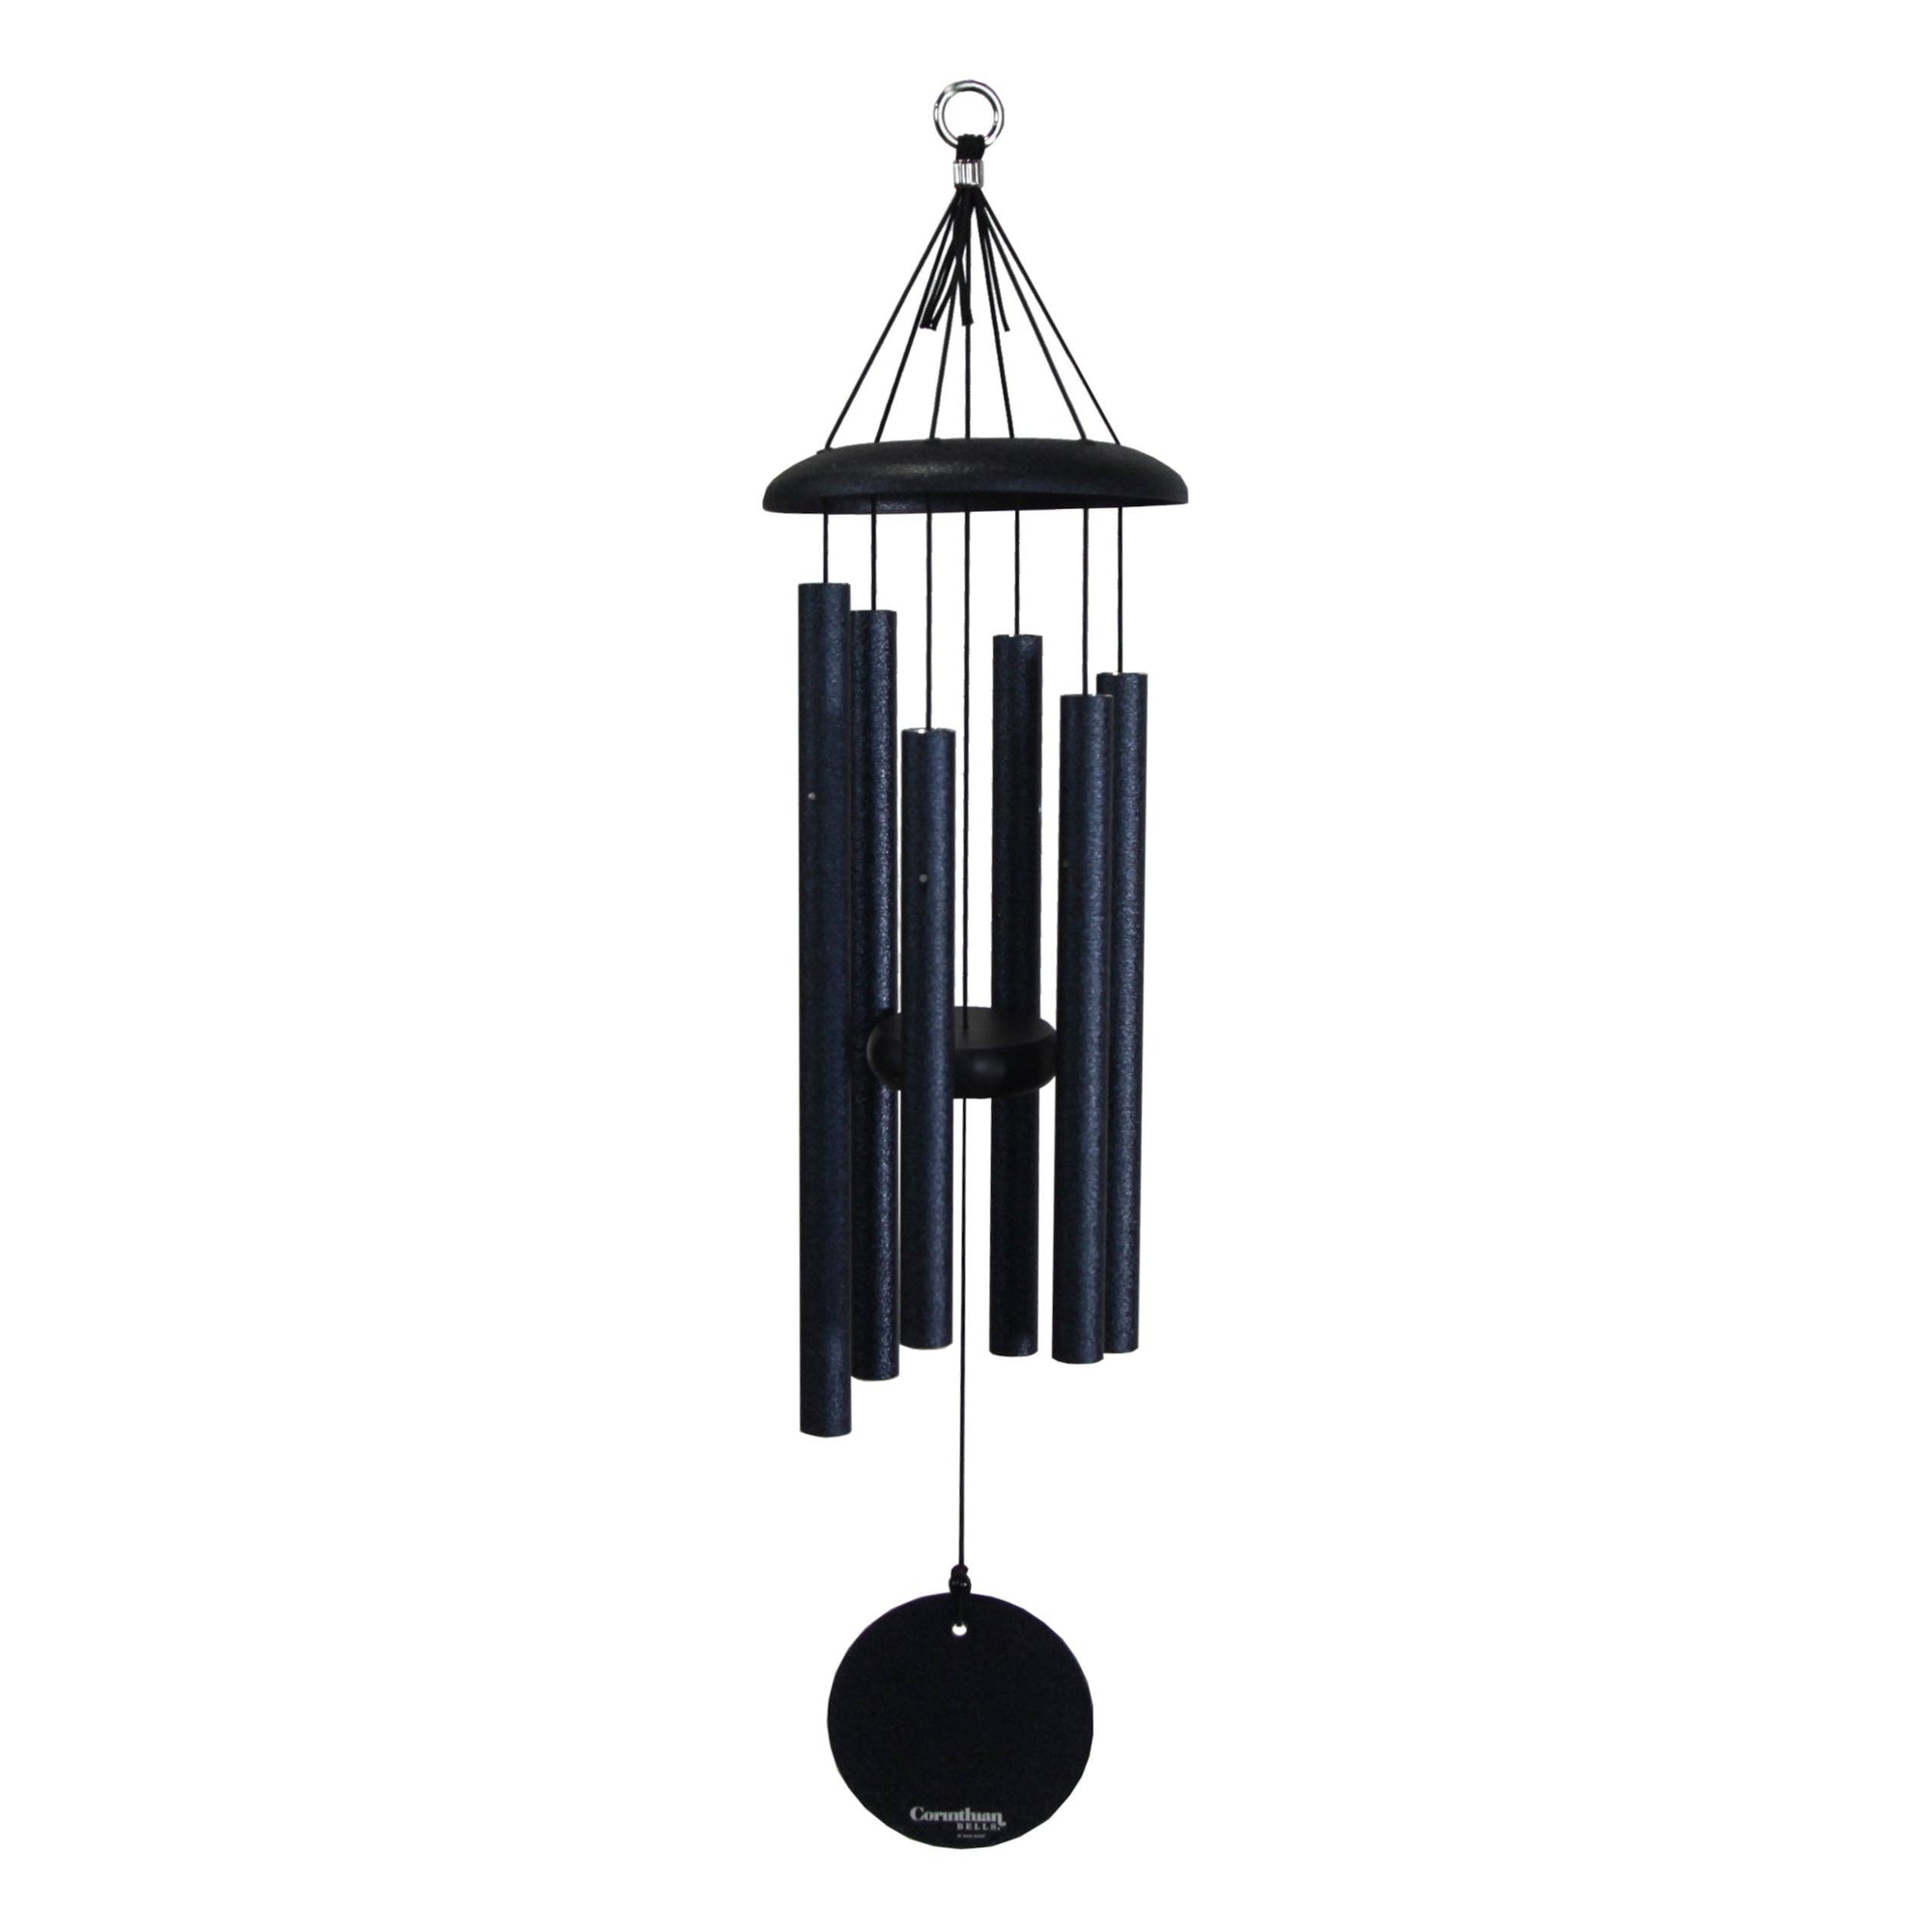 A compact-sized, budget-friendly 27" Windchime Corinthian Bells® hanging gracefully on a white background.